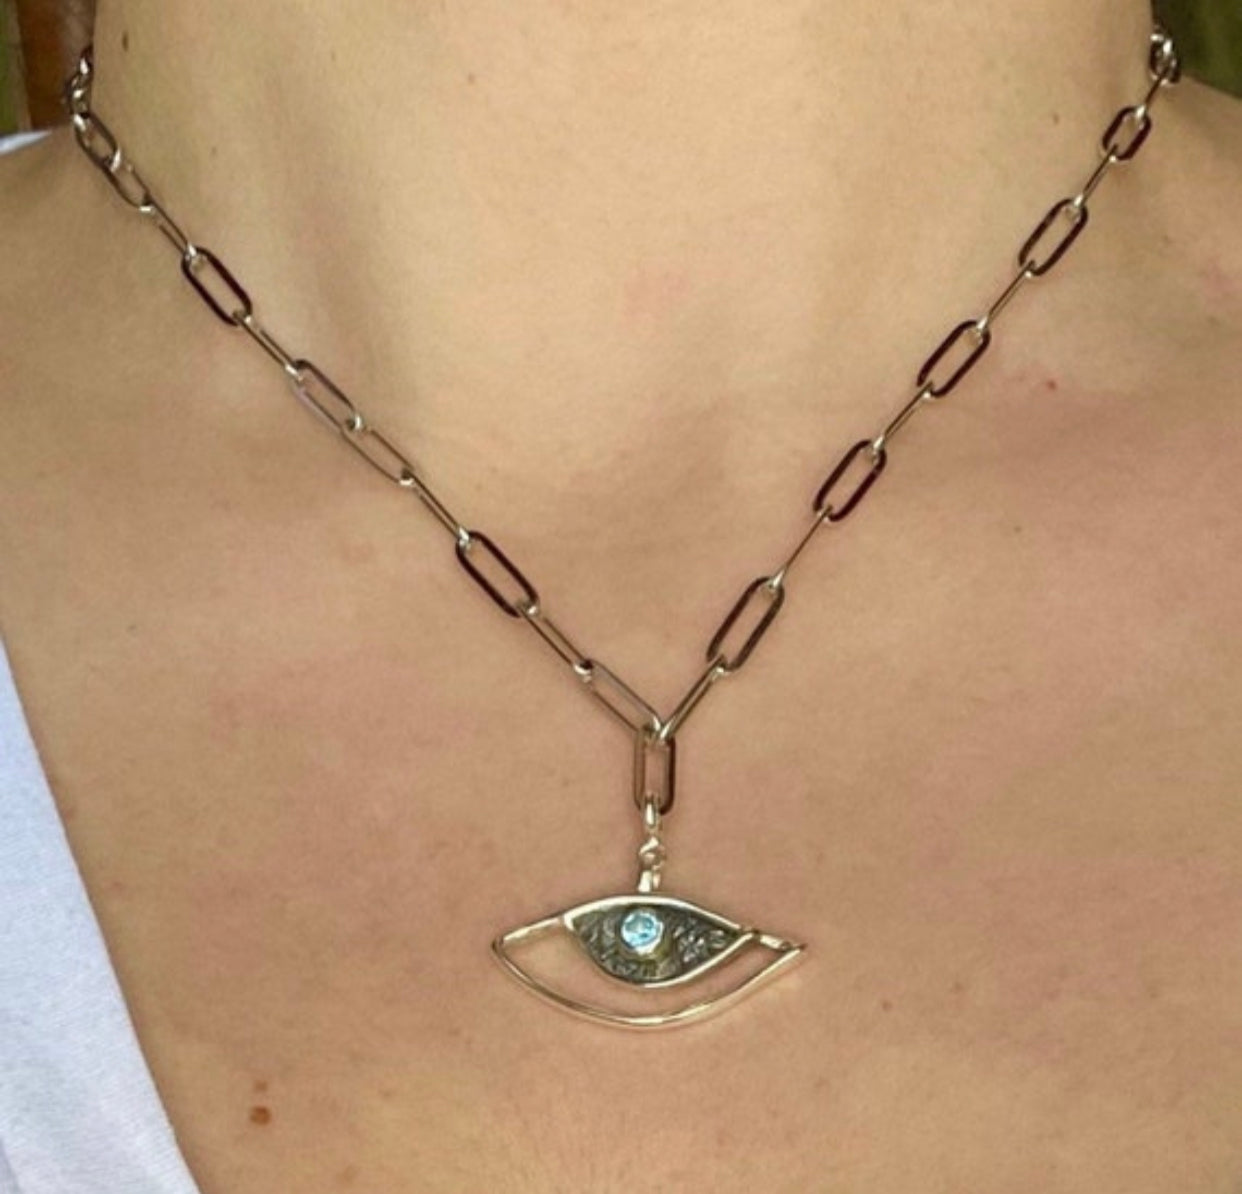 paper clip chain with evil eye necklace